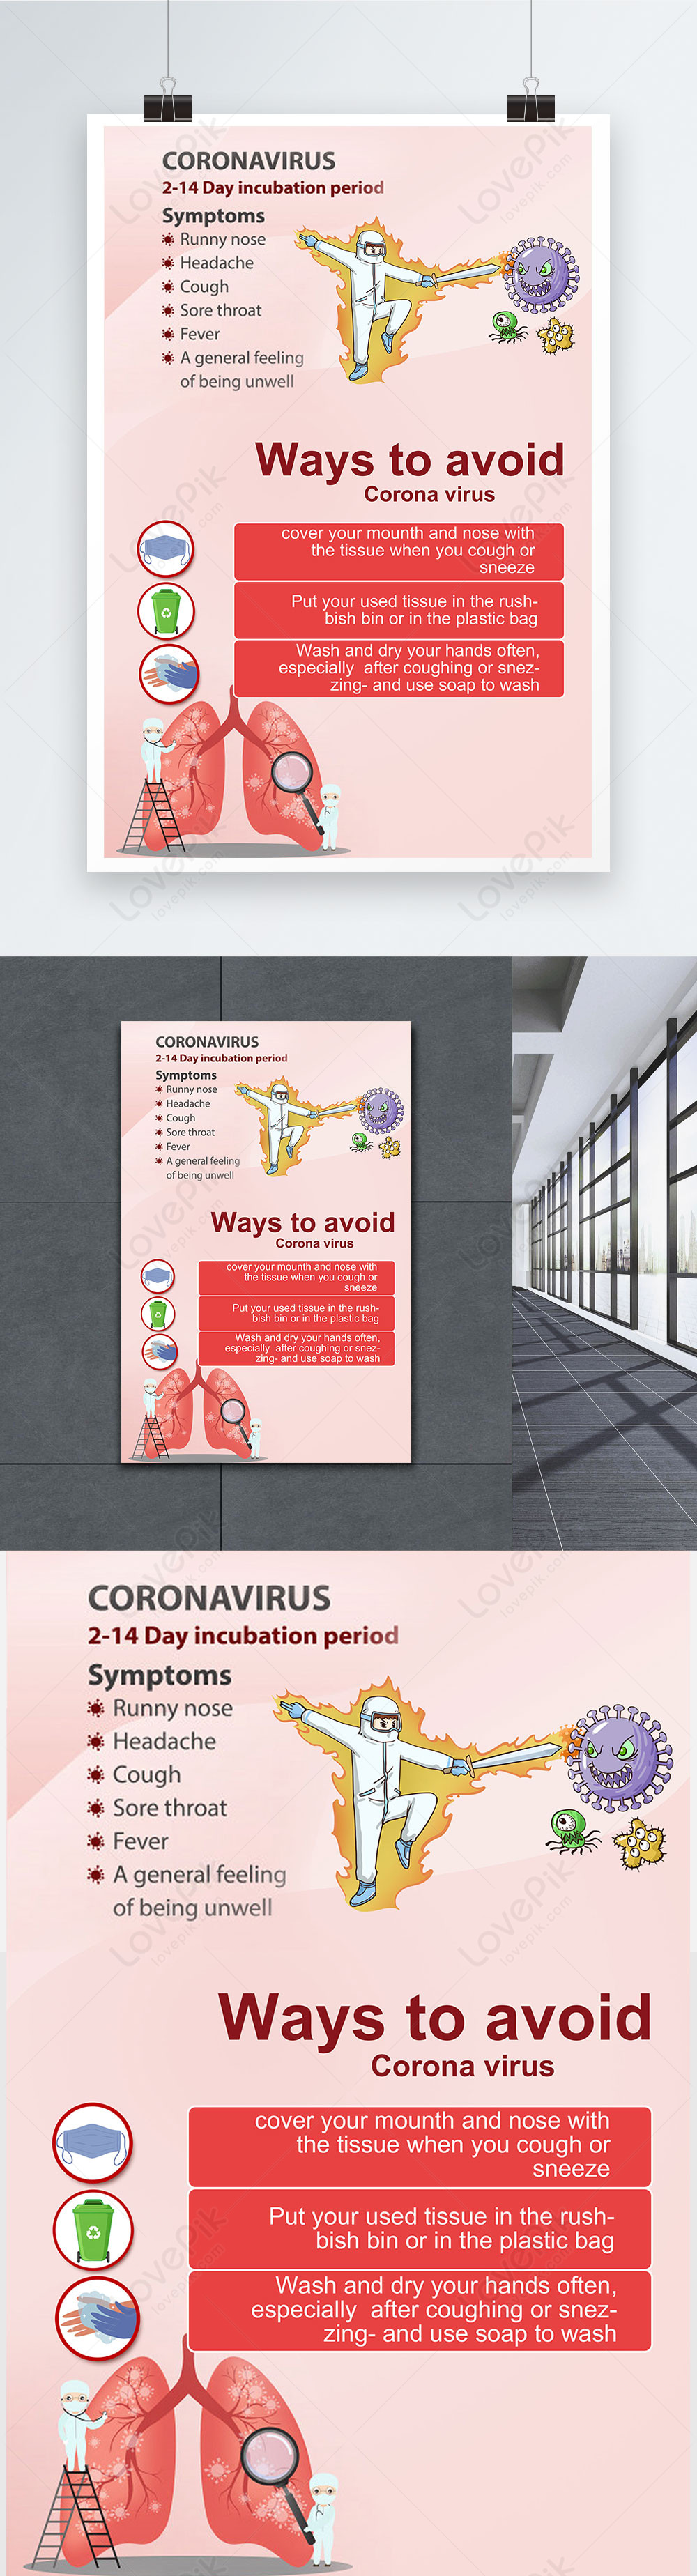 How to avoid coronavirus  poster  template image picture 